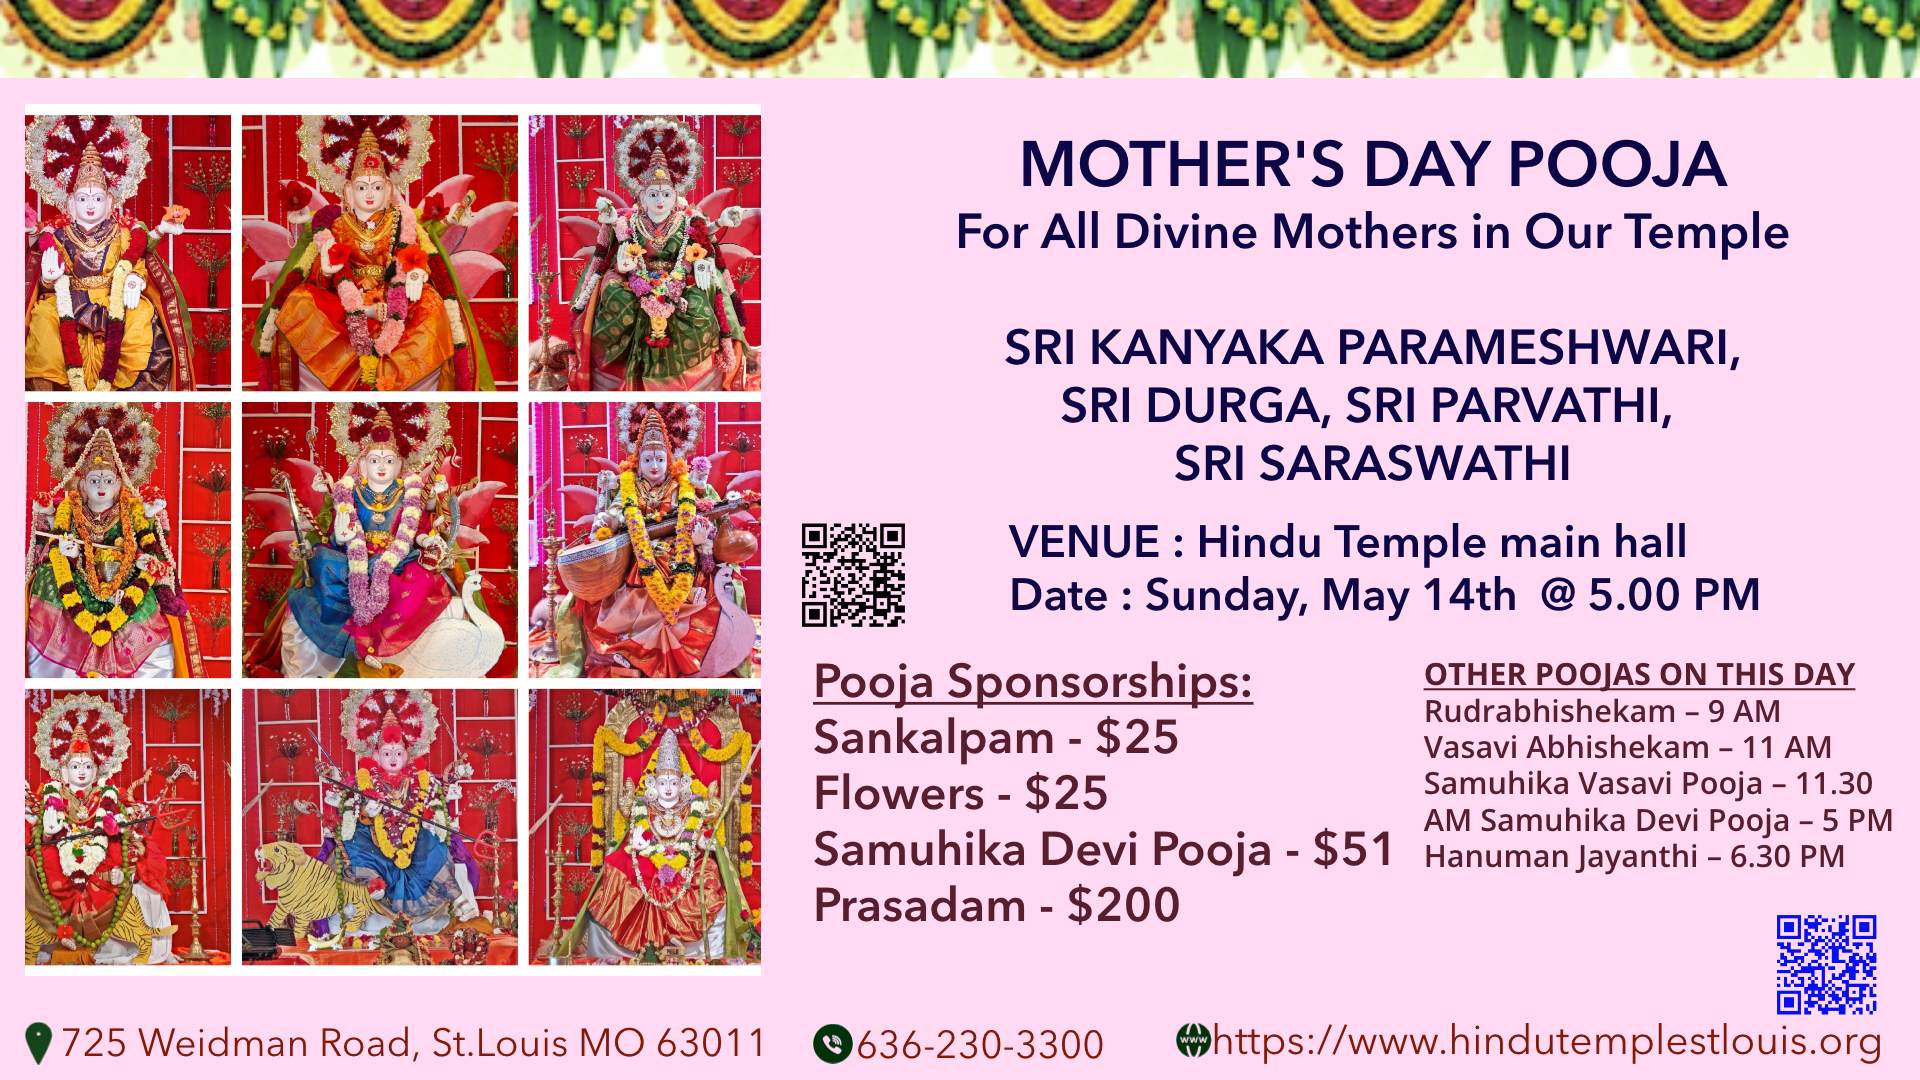 MOTHER’S DAY POOJA – 05/14 @ 5 PM